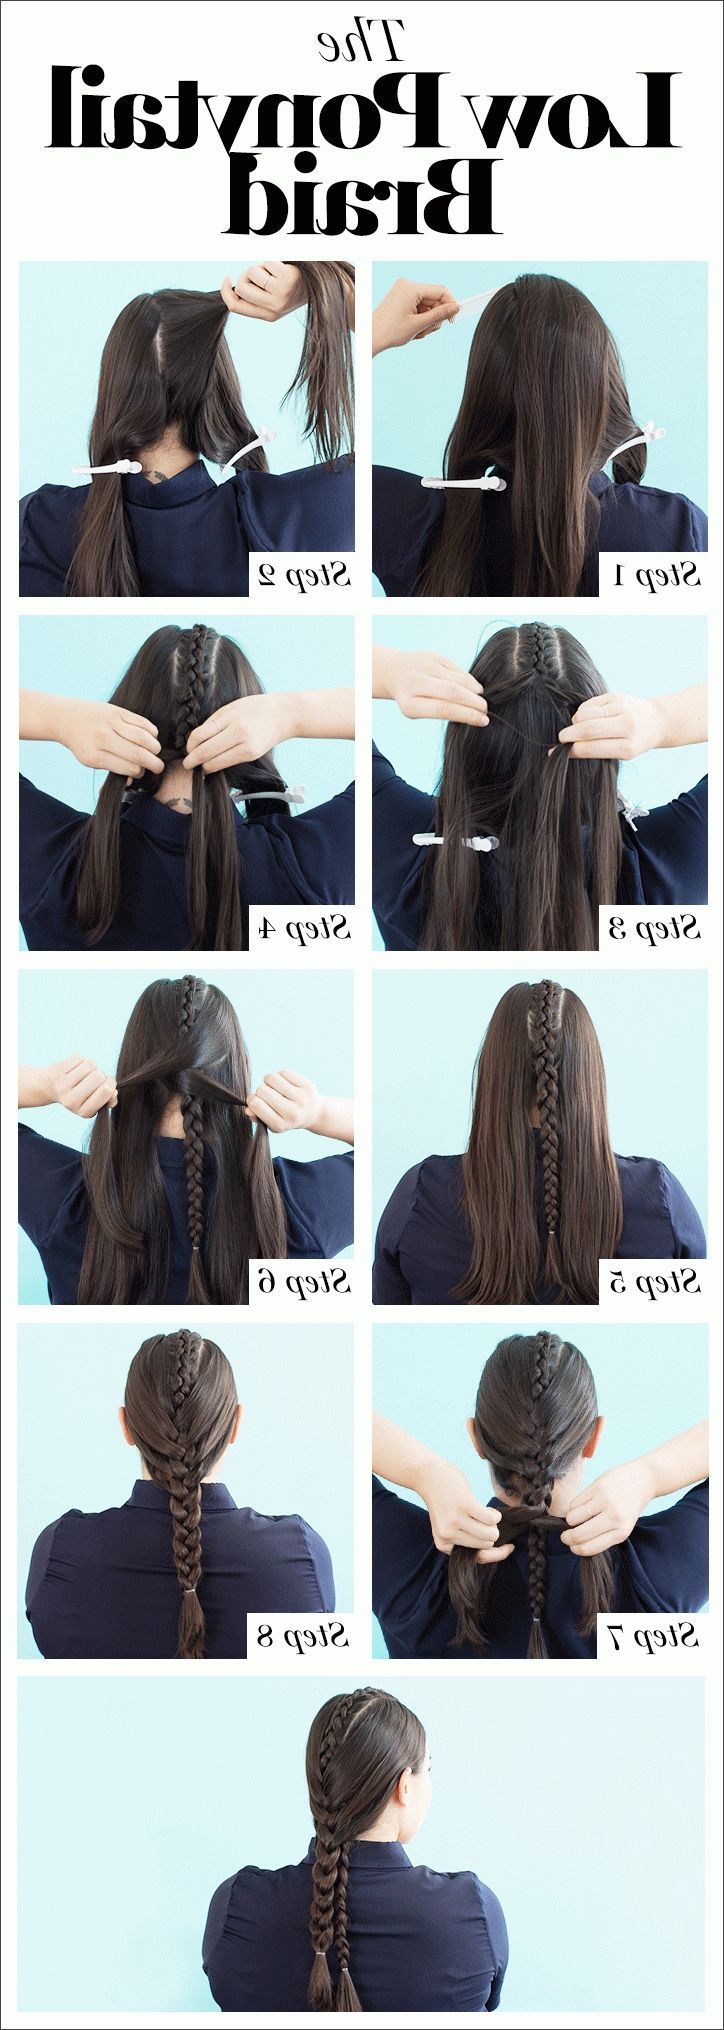 Most Recent Dyed Simple Ponytail Hairstyles For Second Day Hair Inside How To Braid Hair: 8 Cute Diy Hairstyles For Every Hair Type (Gallery 16 of 20)